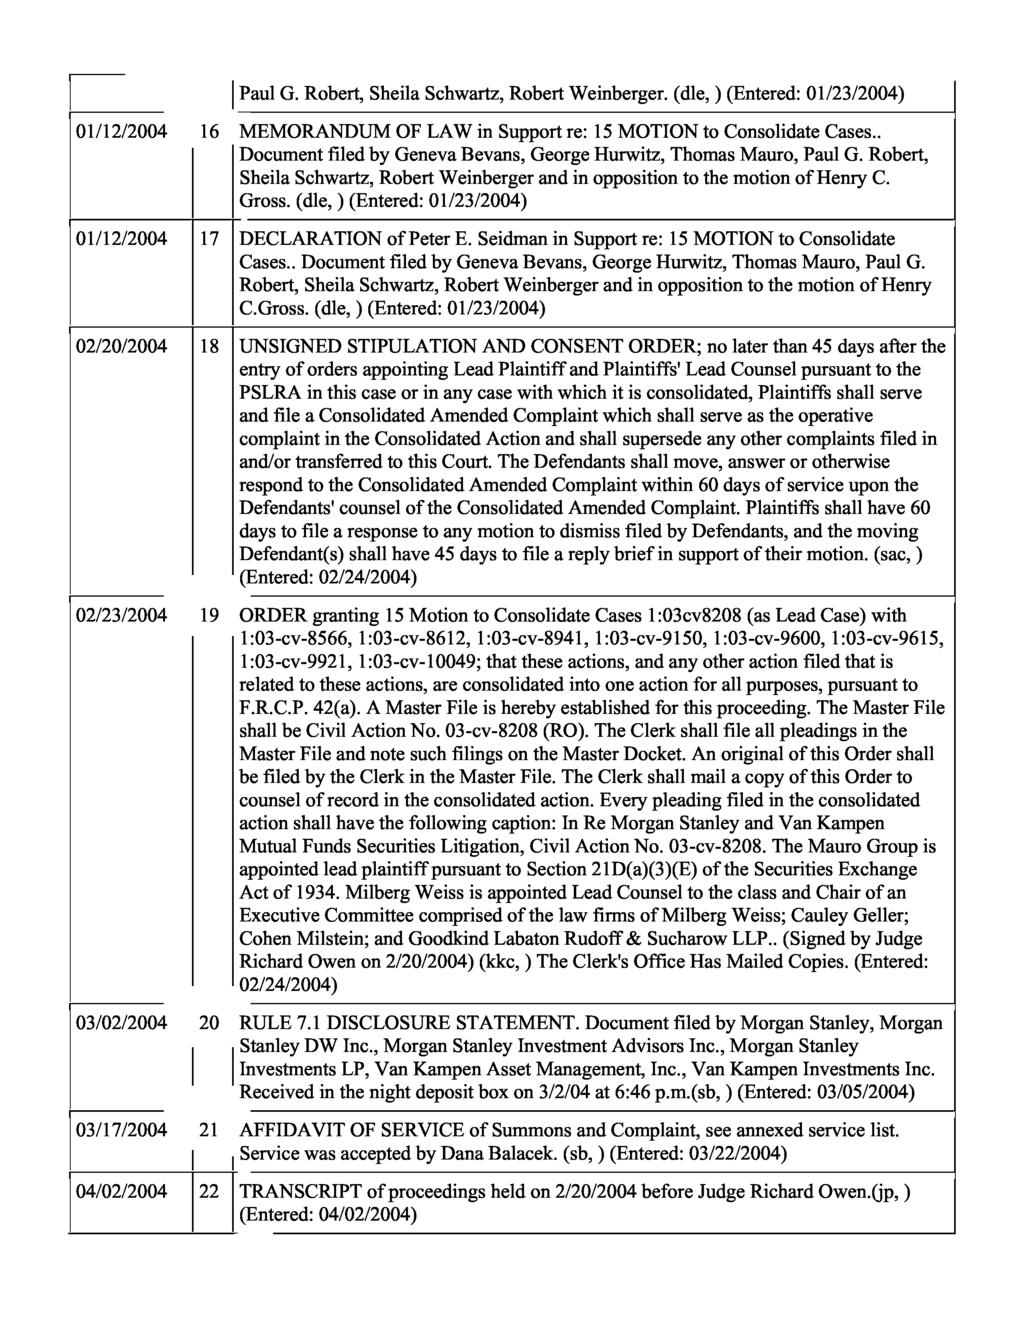 Paul G. Robert, Sheila Schwartz, Robert Weinberger. (dle, ) (Entered: 01/23/2004) 01/12/2004 16 MEMORANDUM OF LAW in Support re: 15 MOTION to Consolidate Cases.